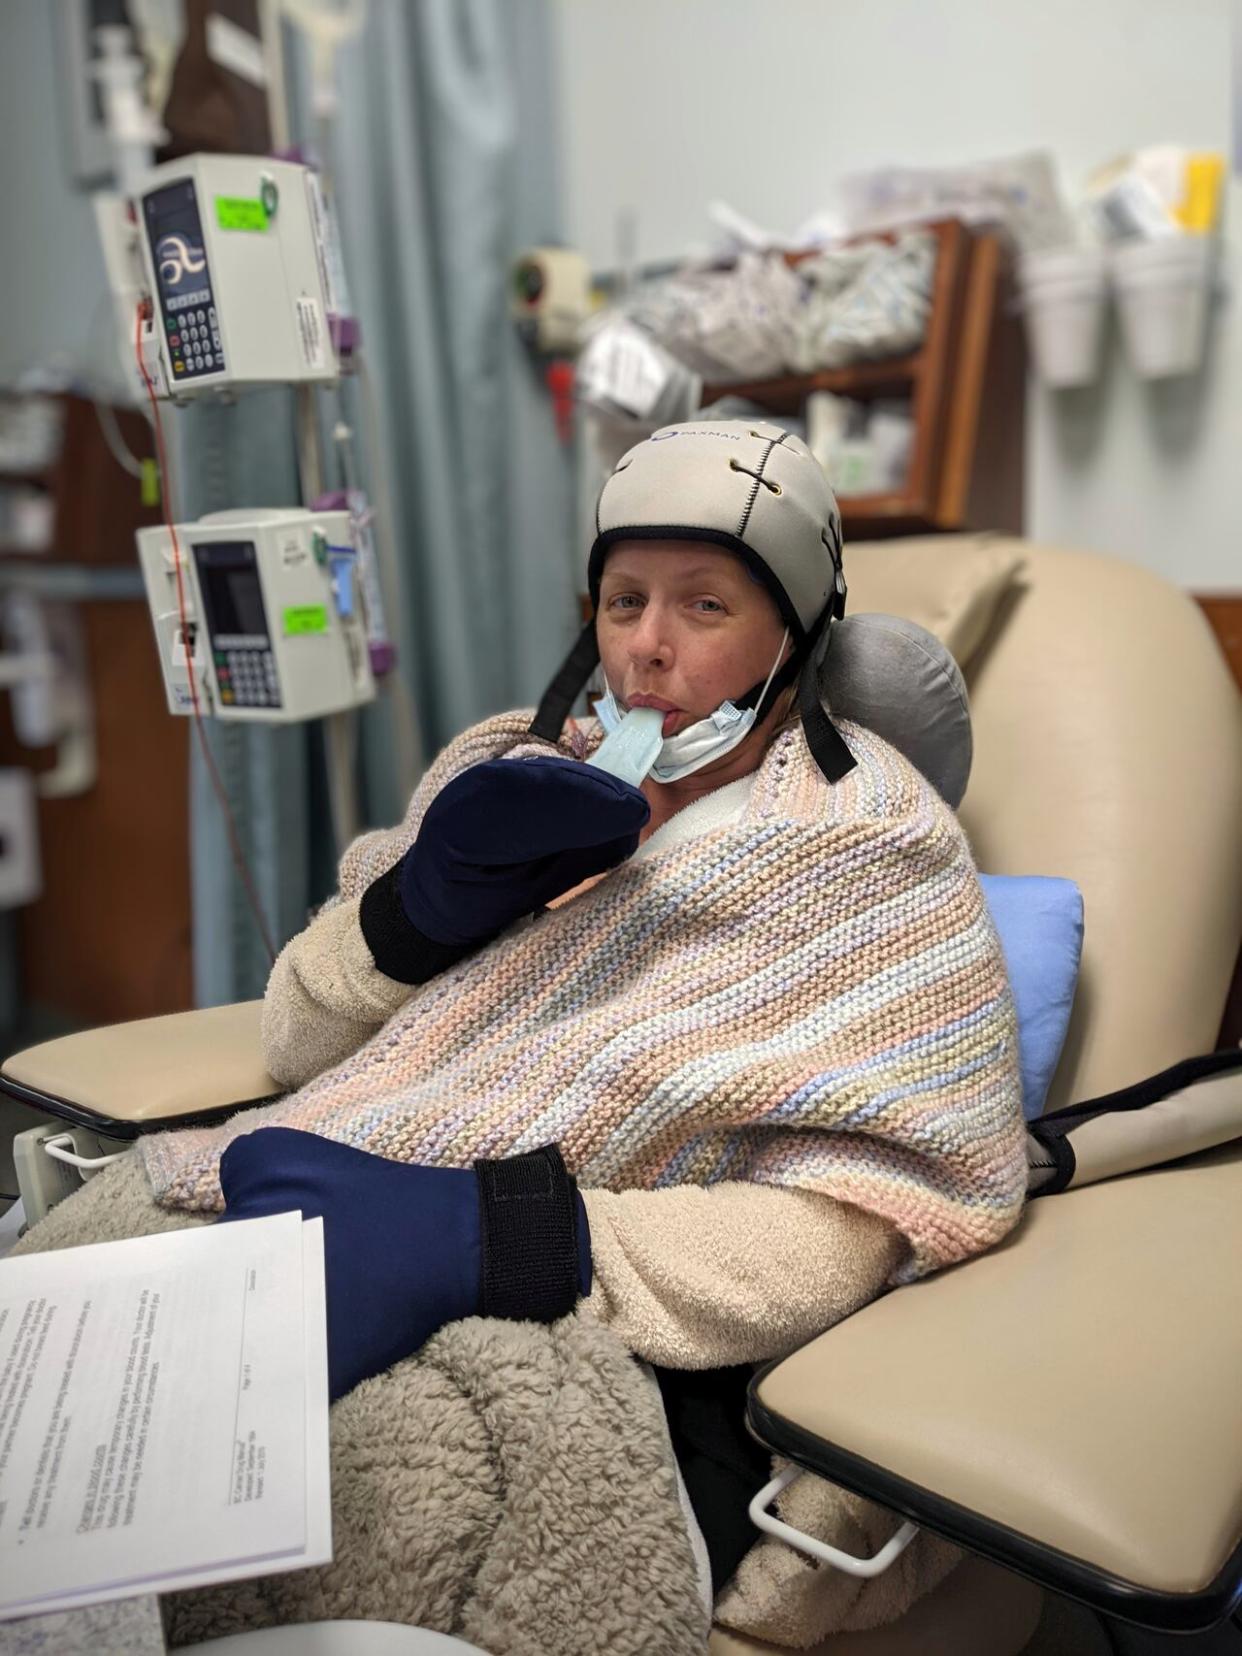 Cold capping helped Tammy Wegener to keep her hair while going through chemotherapy, and she thinks the treatment should be equally accessible to others across the country. (Submitted by Tammy Wegener - image credit)